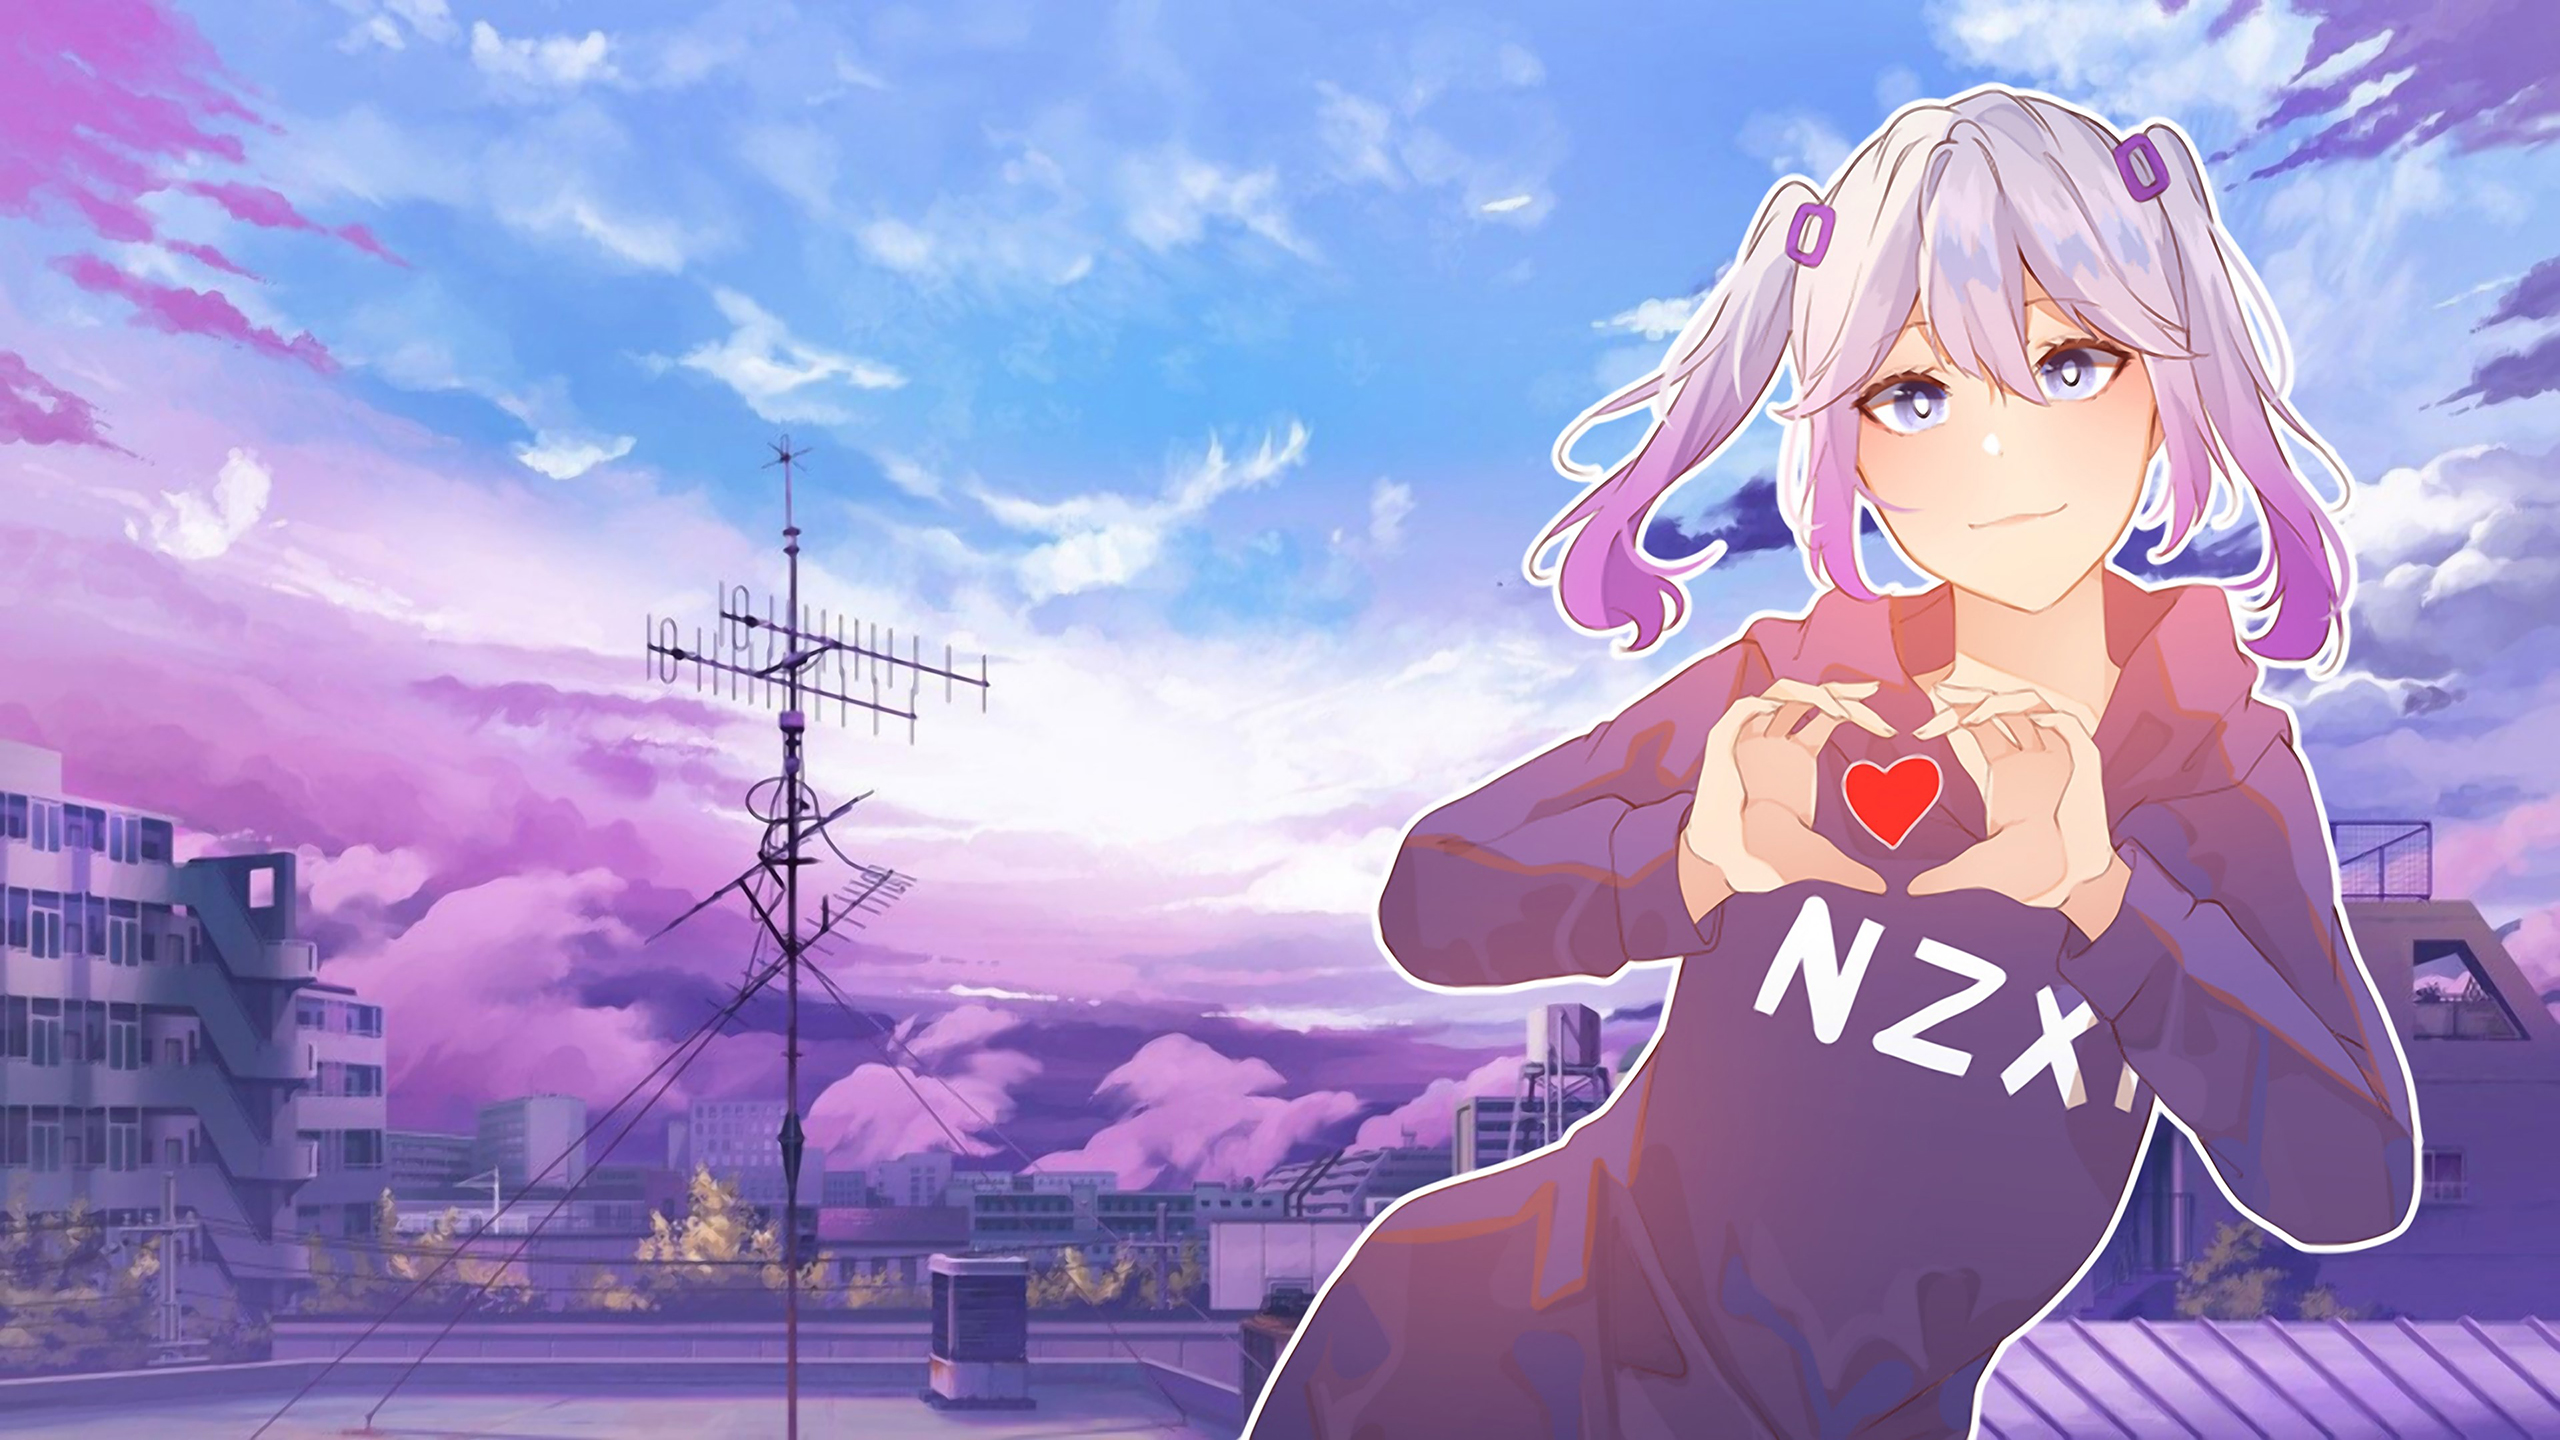 NZXT Pucci PC Gaming Anime 2560x1440